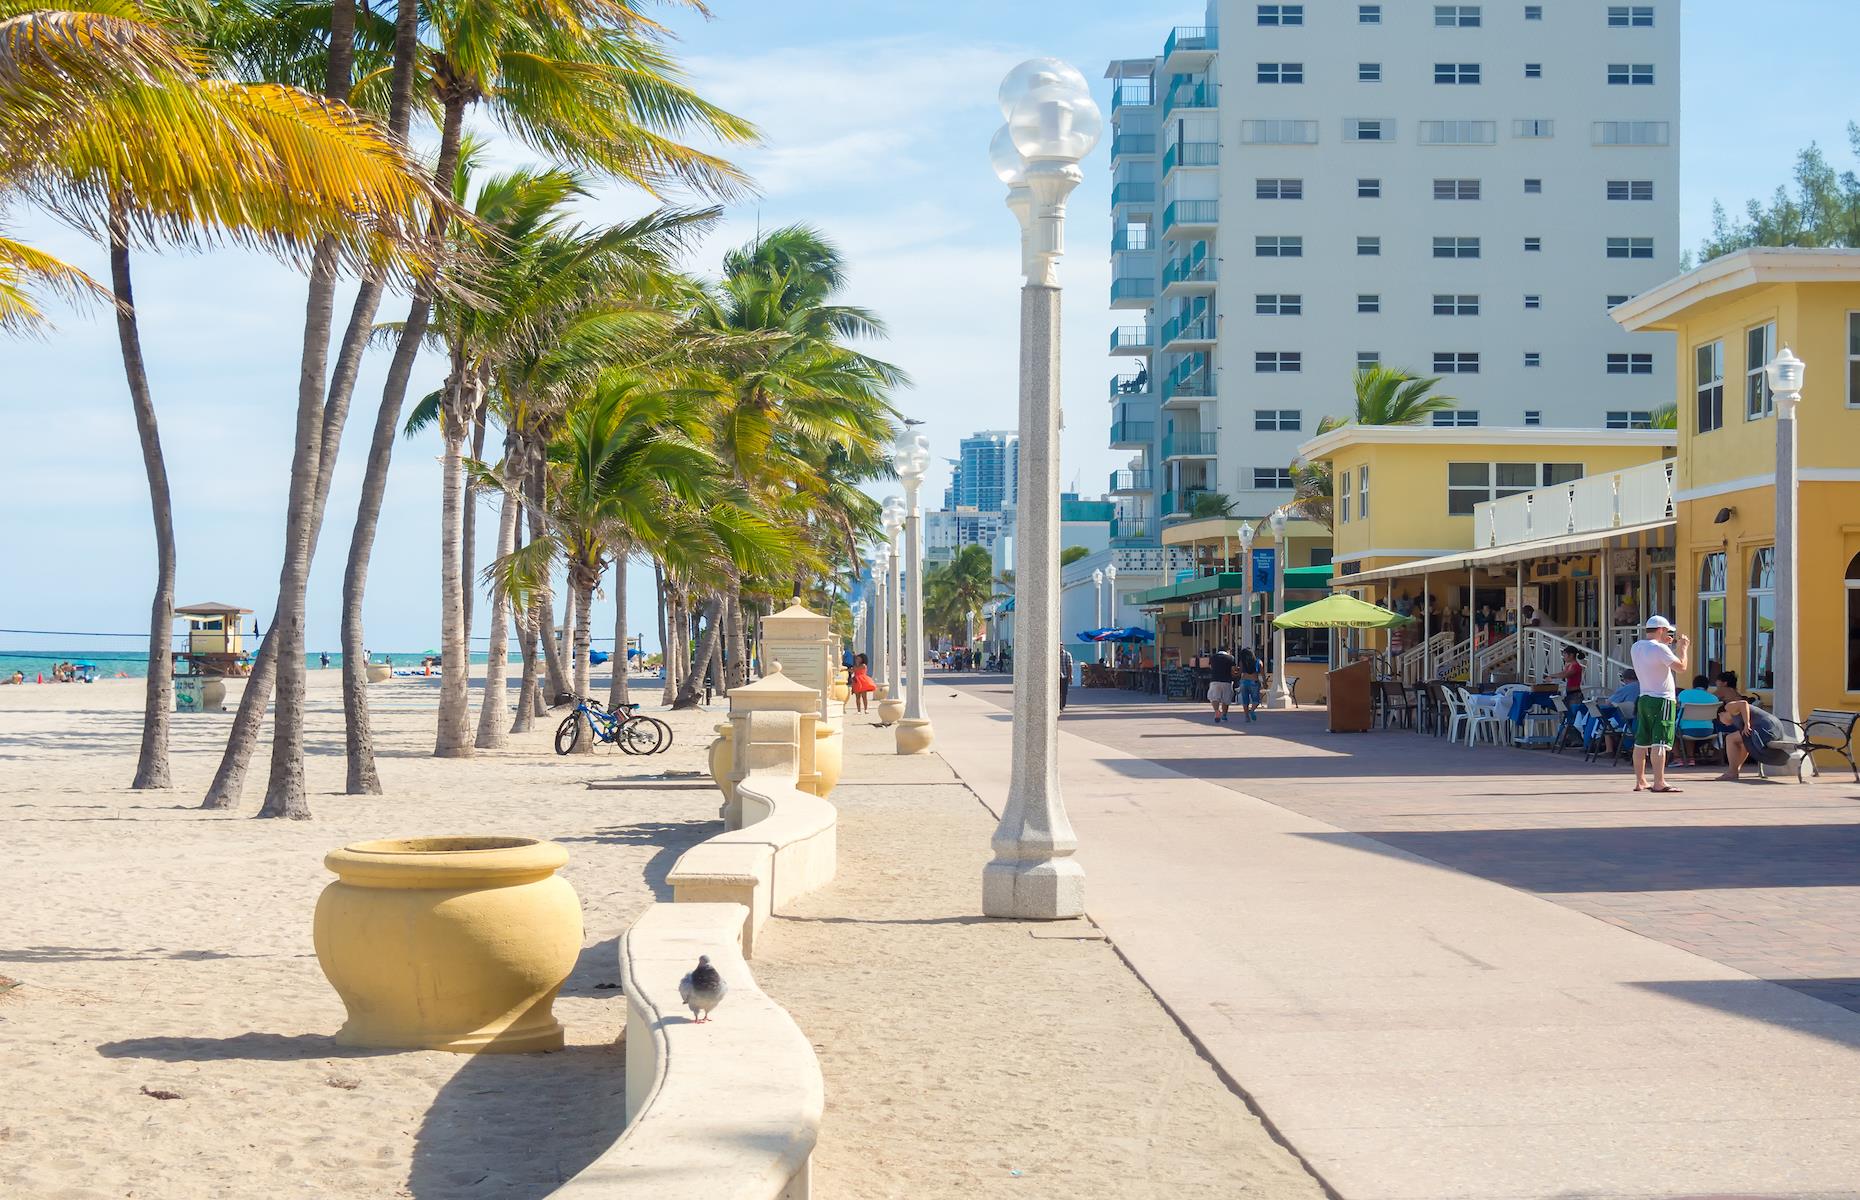 Hidden in plain sight between Miami and Fort Lauderdale, Hollywood Beach offers a change of scene from its big-hitting neighbors. Strolling the oceanfront promenade feels like time traveling to Old Florida, a reminder of America’s beach boardwalk heyday.